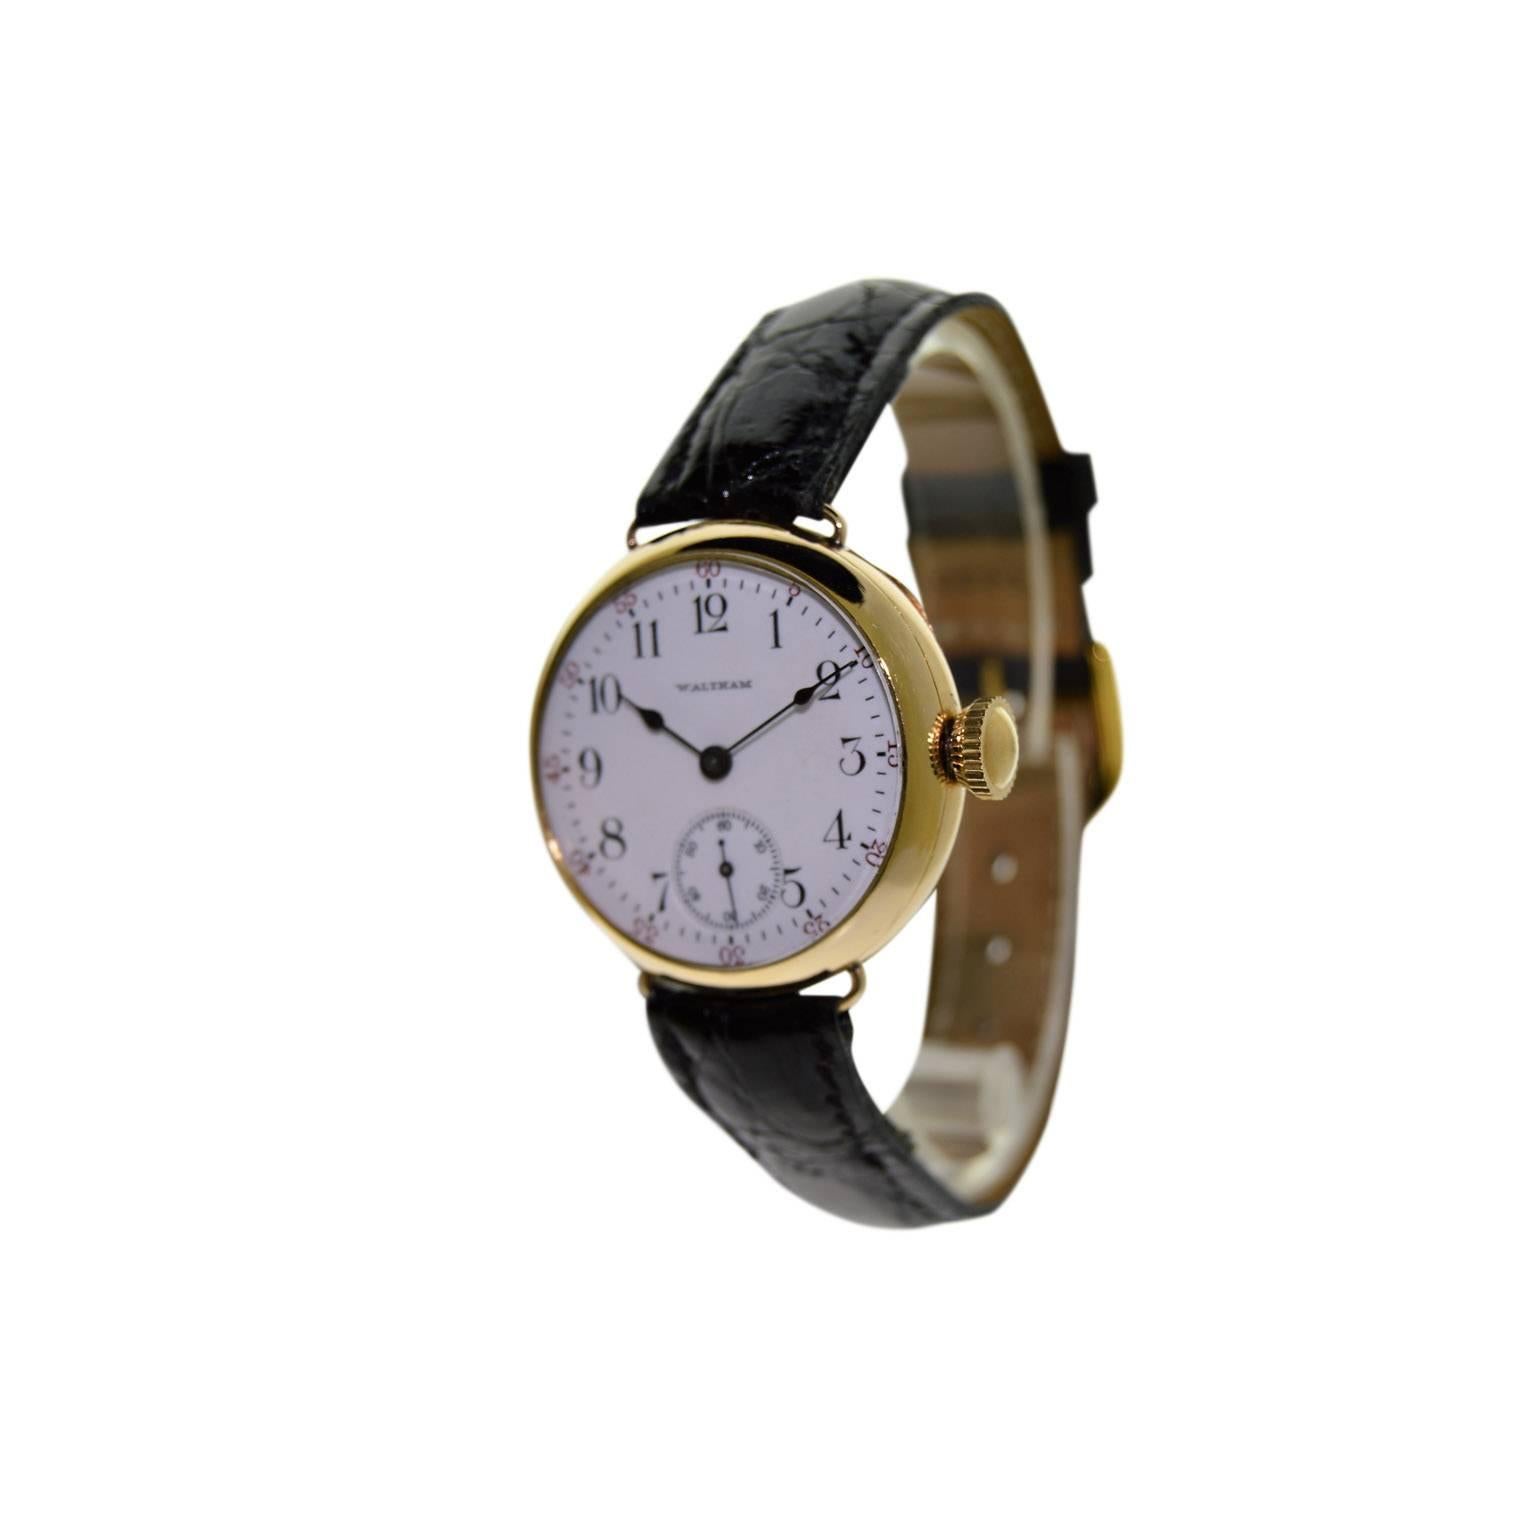 FACTORY / HOUSE: Waltham Watch Company
STYLE / REFERENCE: Military Campaign
METAL / MATERIAL: 14Kt. Yellow Gold Filled
CIRCA: 1908
DIMENSIONS: 36mm X 32mm
MOVEMENT / CALIBER: Manual Winding / 17 Jewels 
DIAL / HANDS: Original Kiln Fired Enamel with